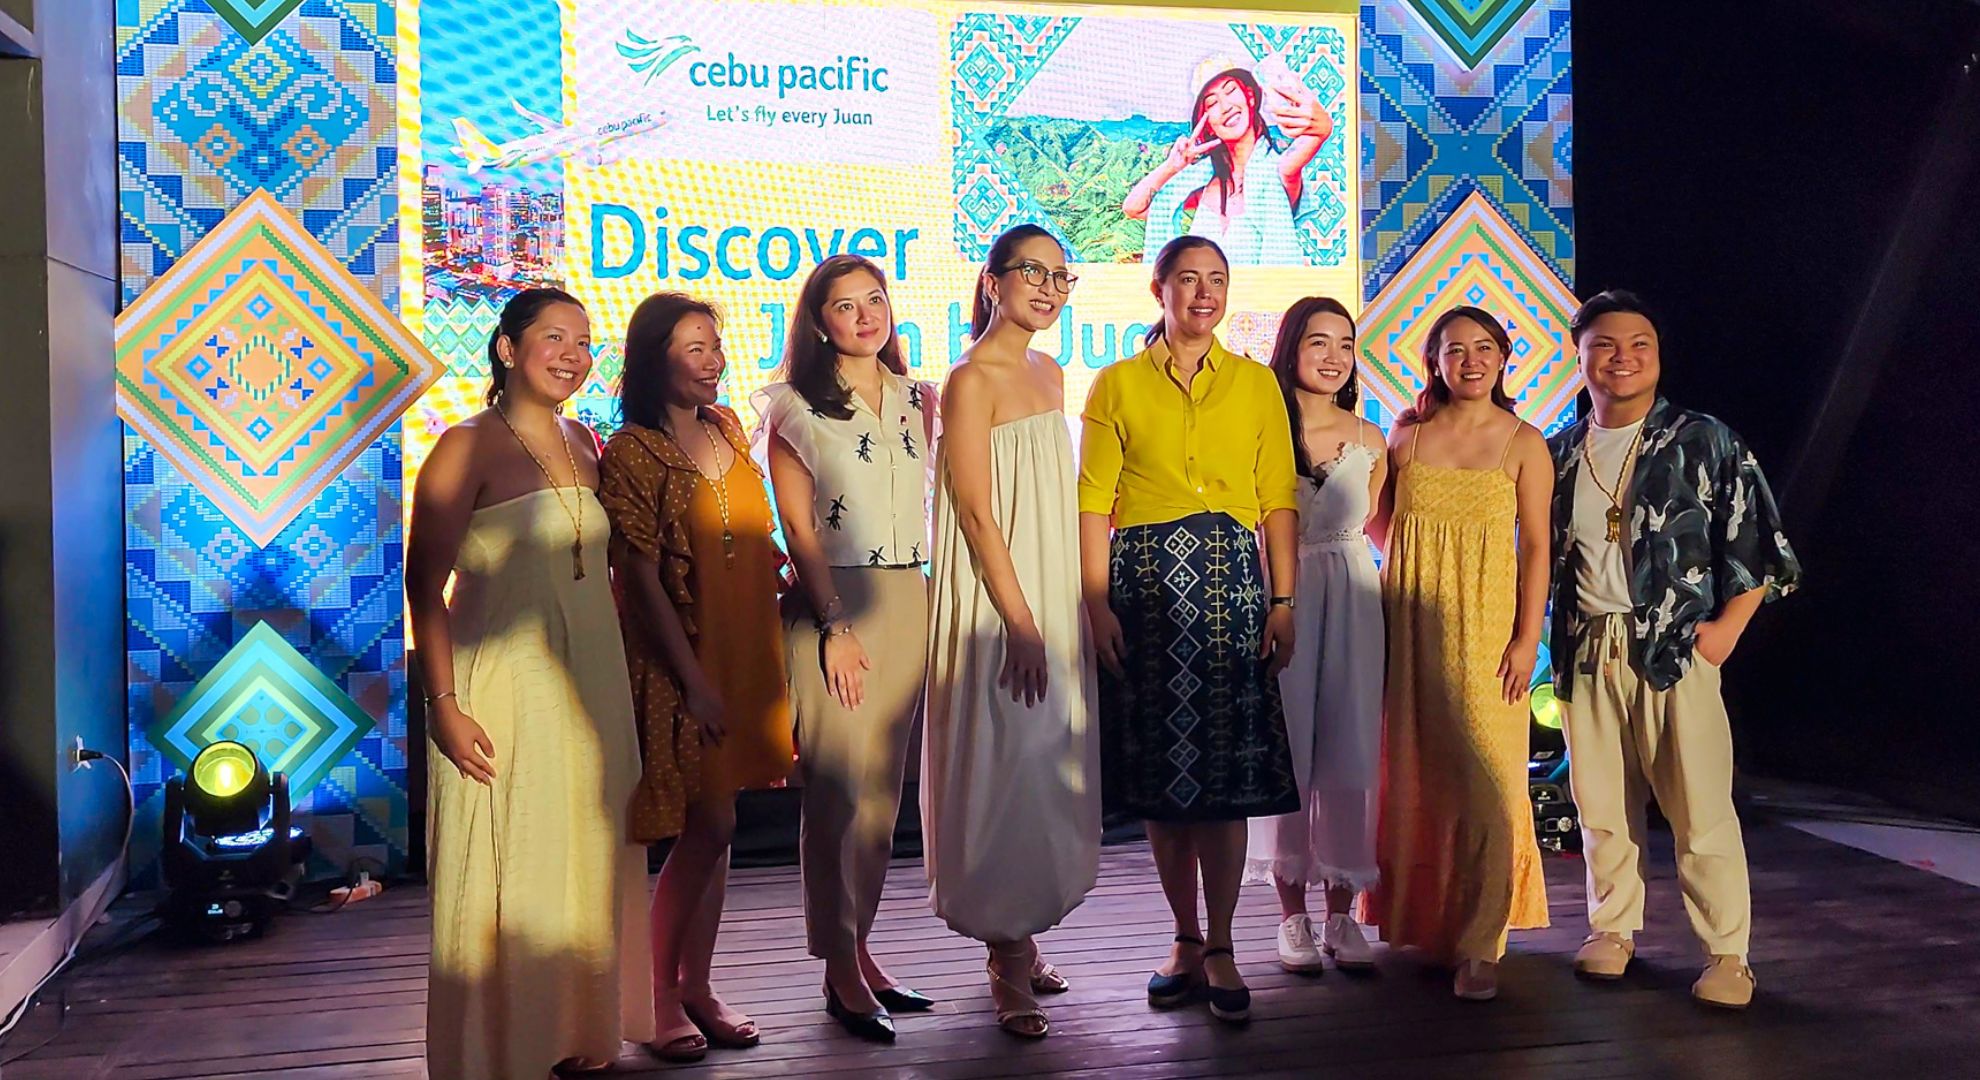 Discover the Philippines ‘Juan by Juan’ with Cebu Pacific